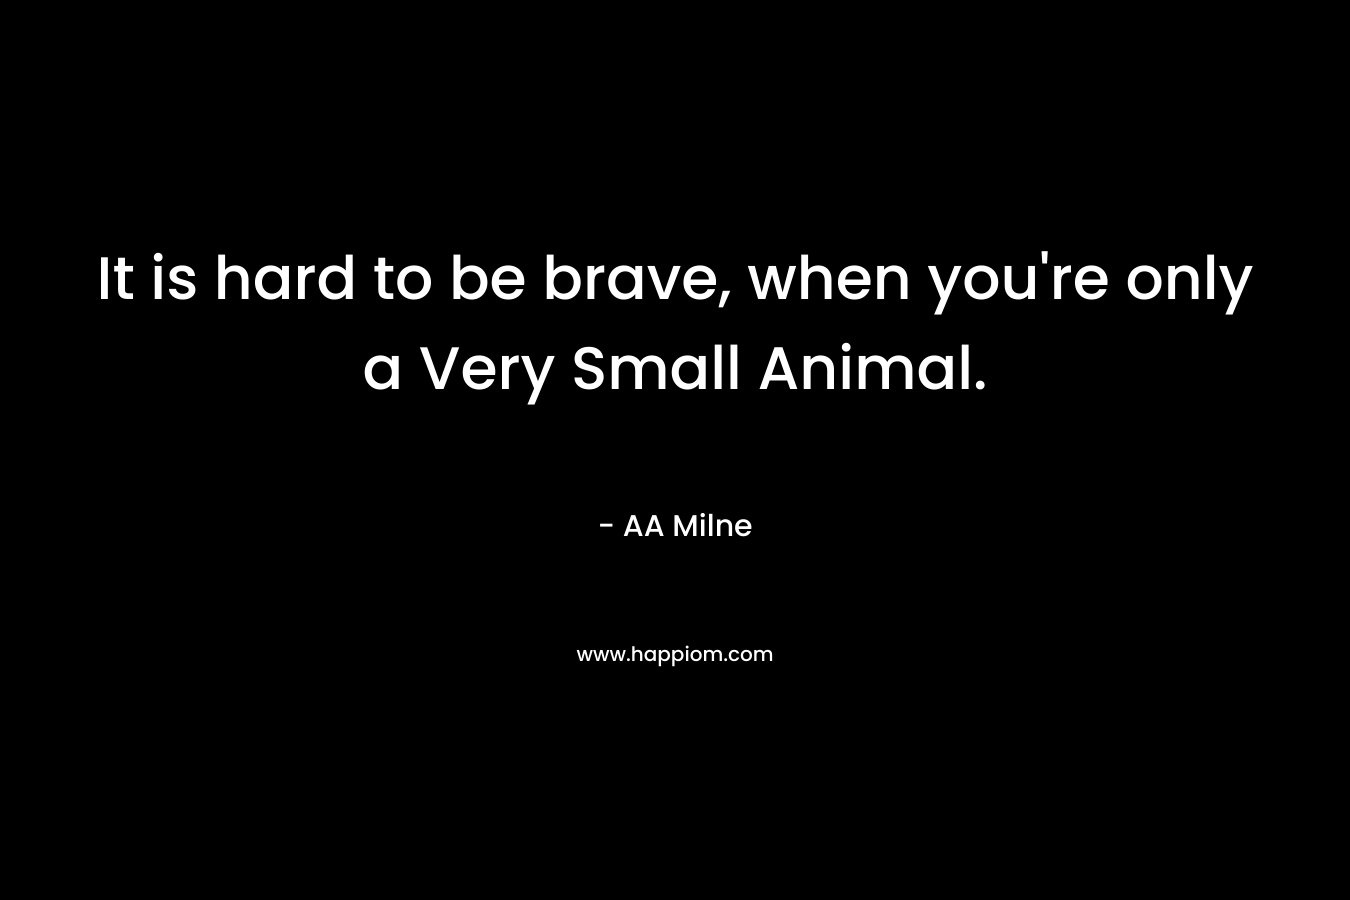 It is hard to be brave, when you're only a Very Small Animal.